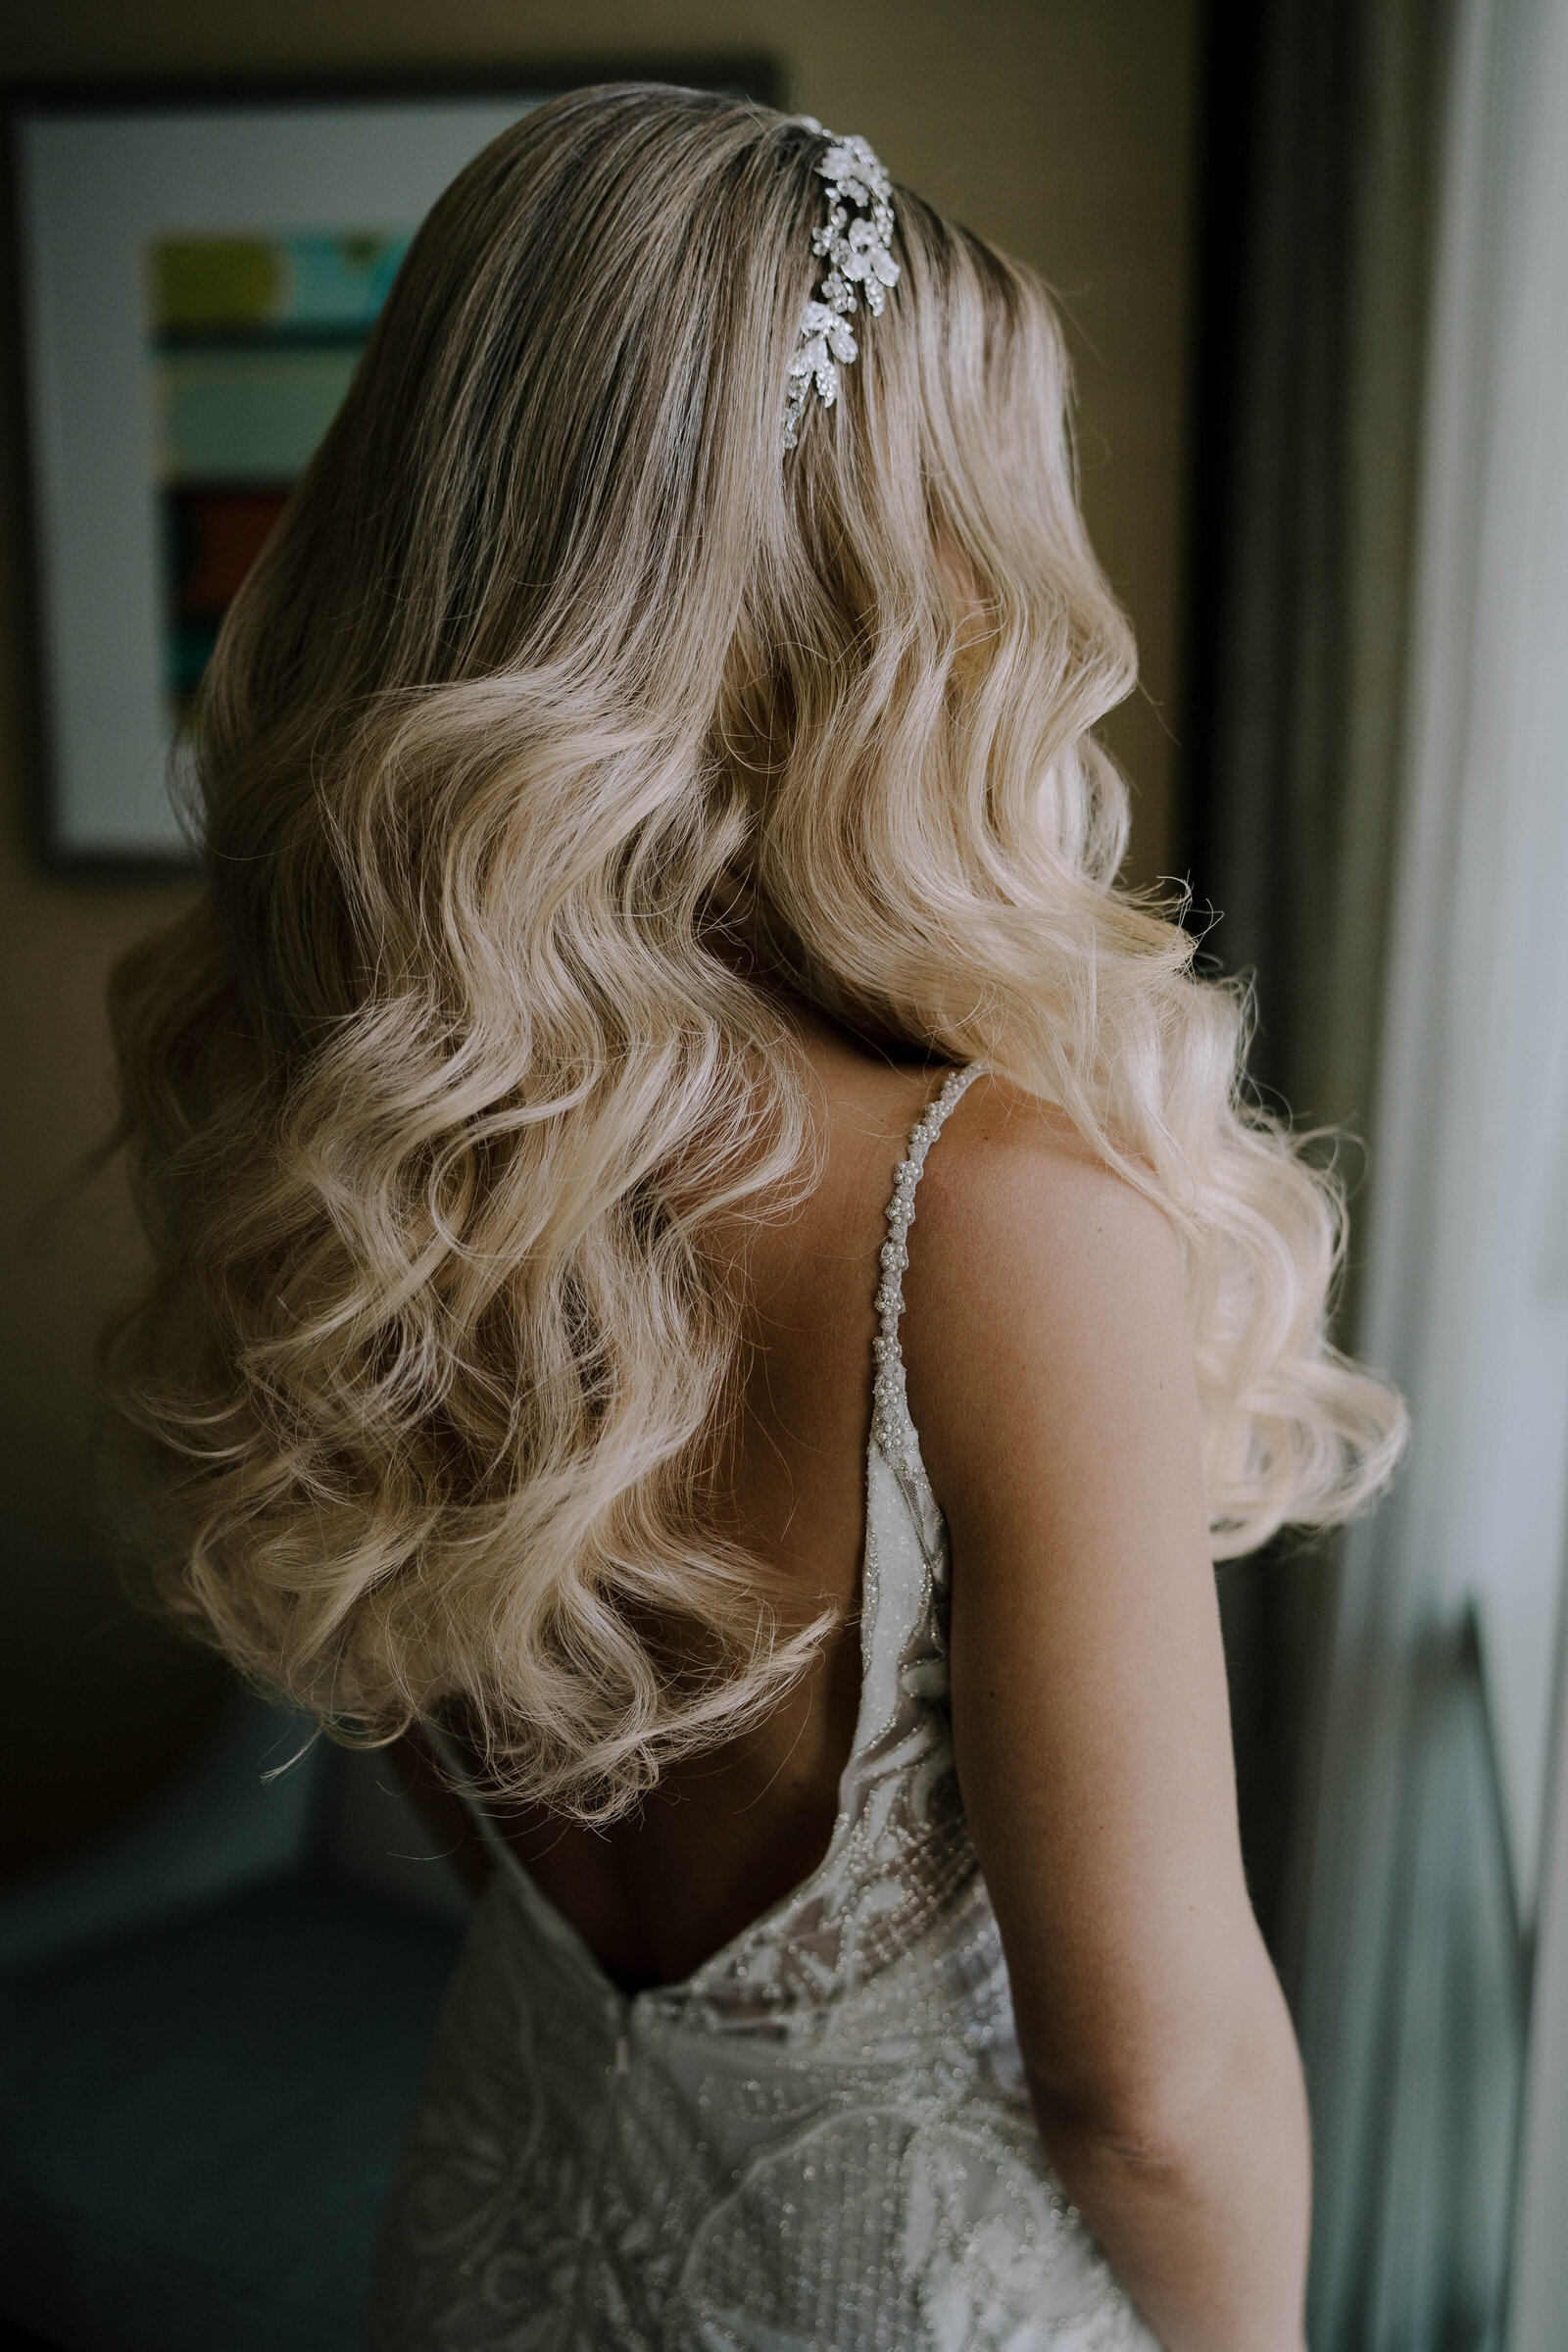 Capture the timeless beauty of an elegant bridal updo hairstyle crafted by our Philadelphia bridal hair stylist. Perfect for your wedding day.